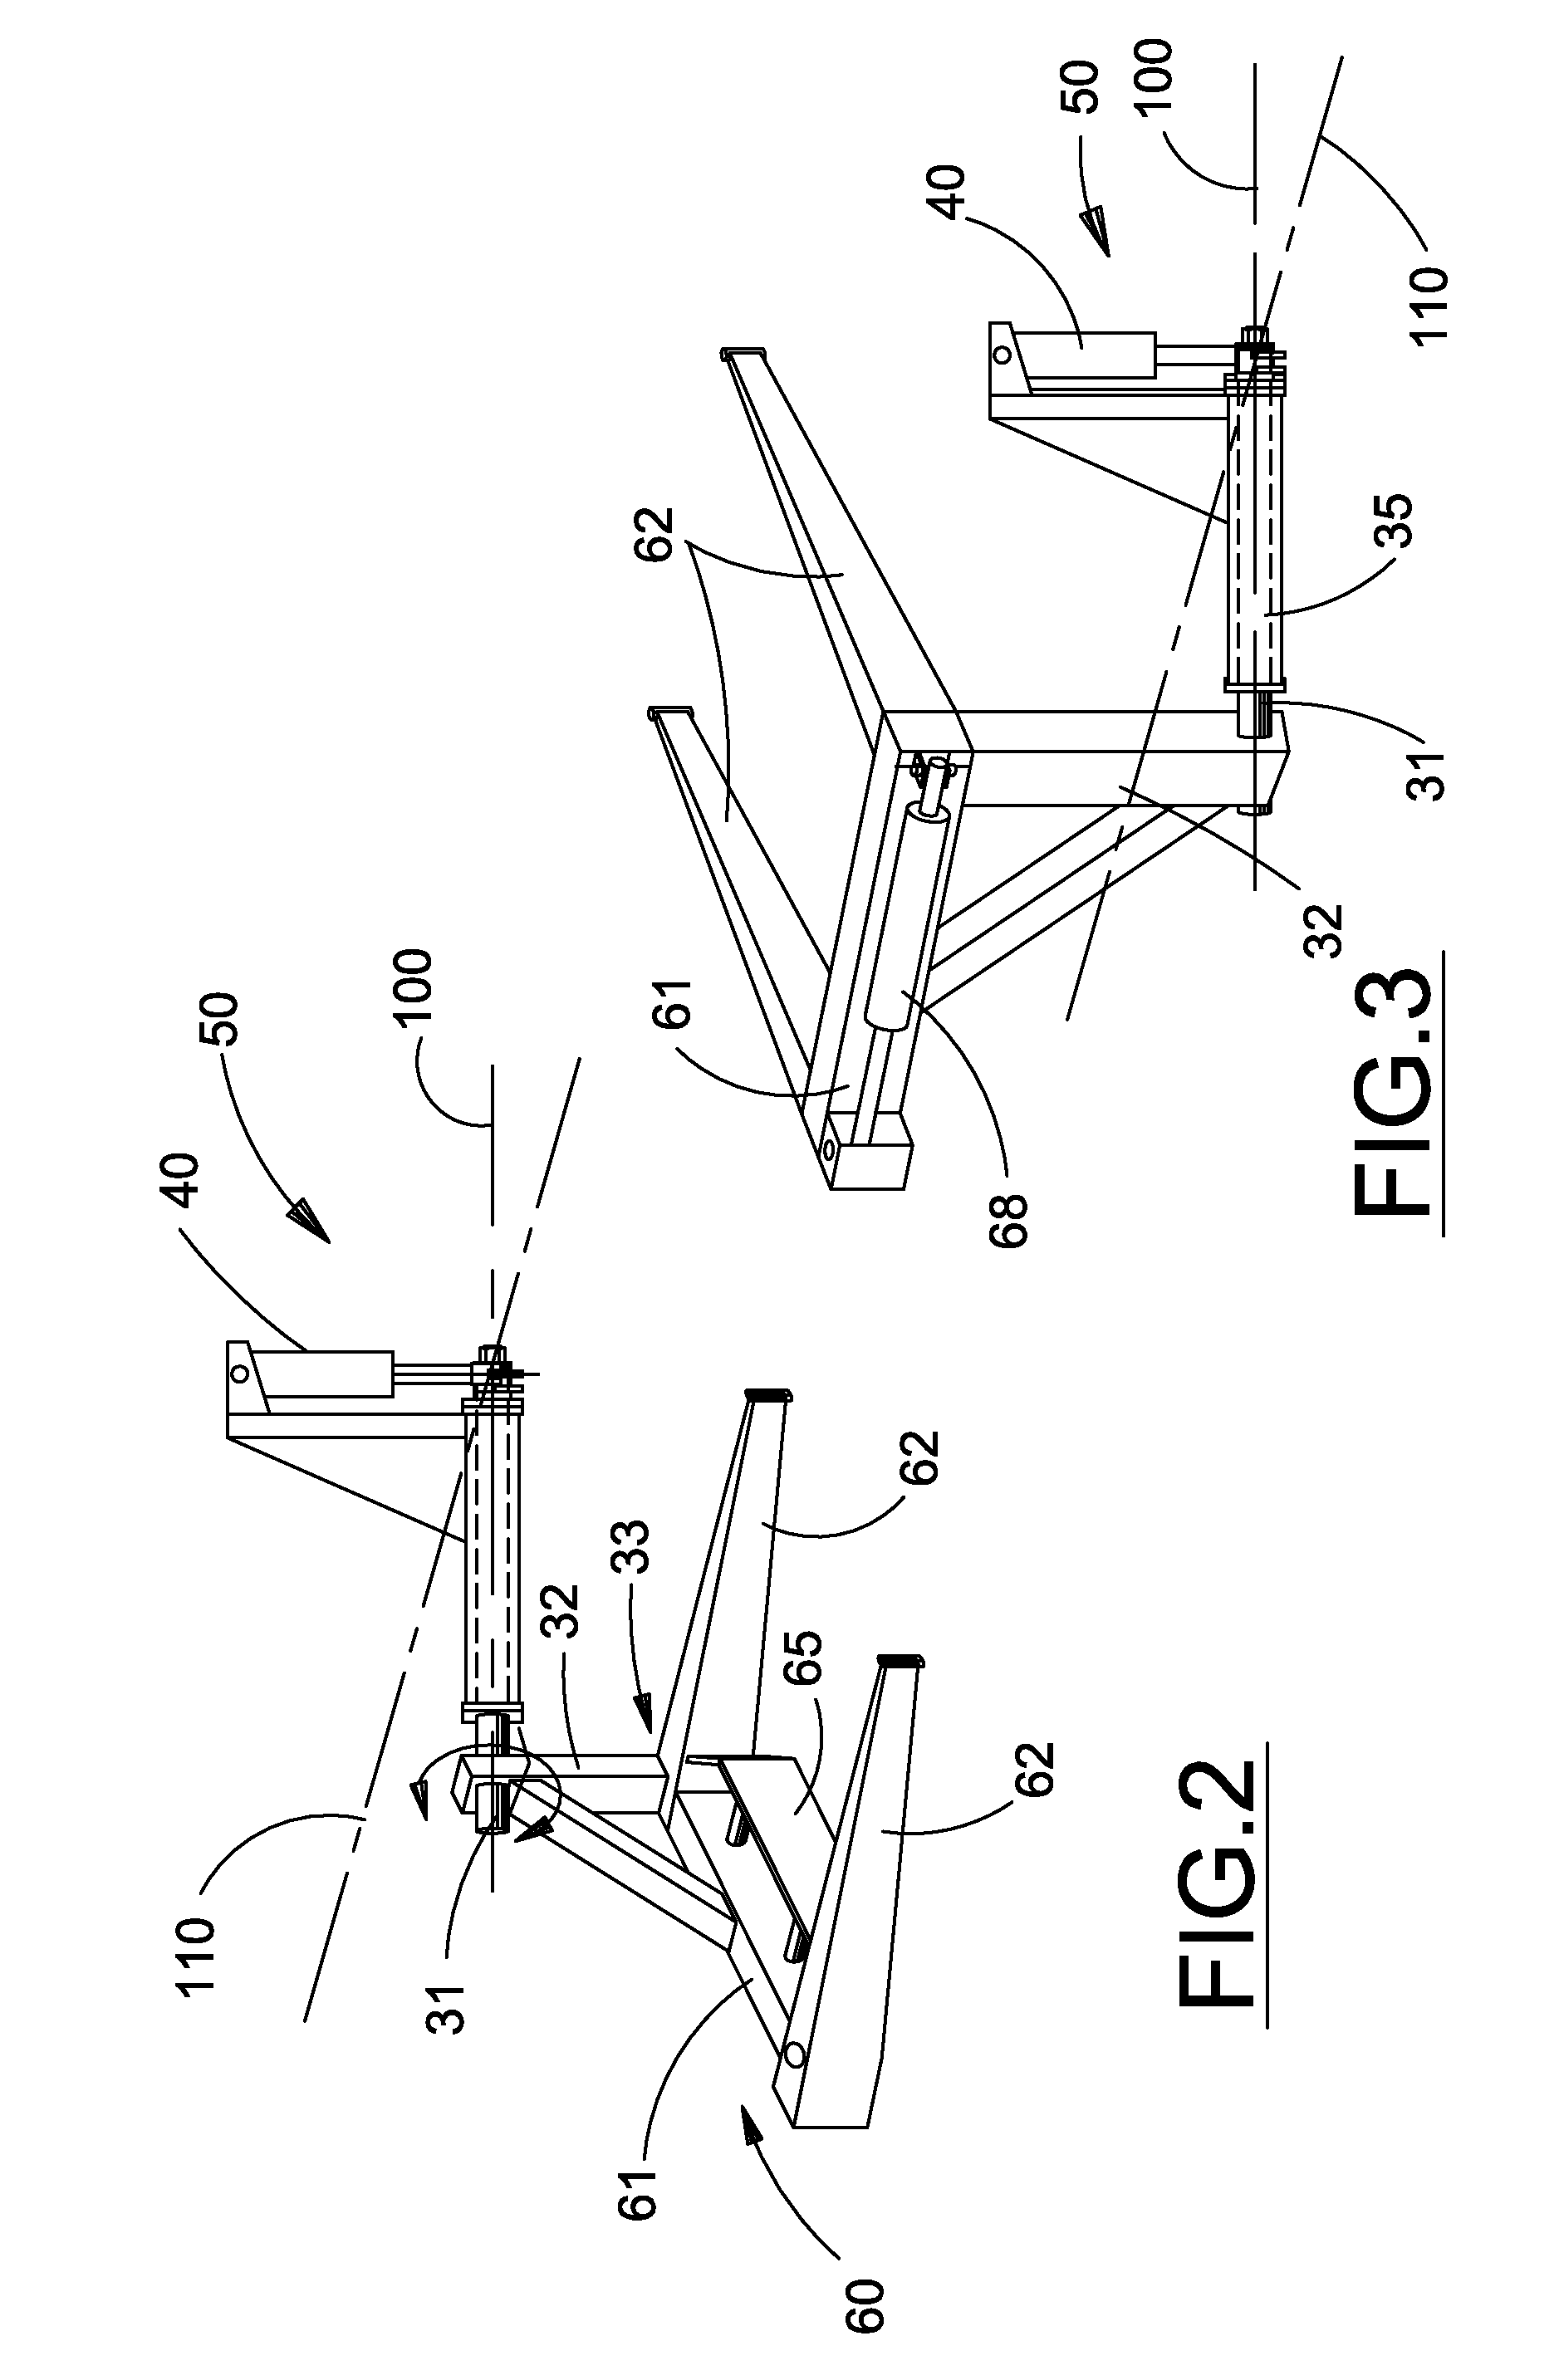 Automatic control of a large bale loading apparatus